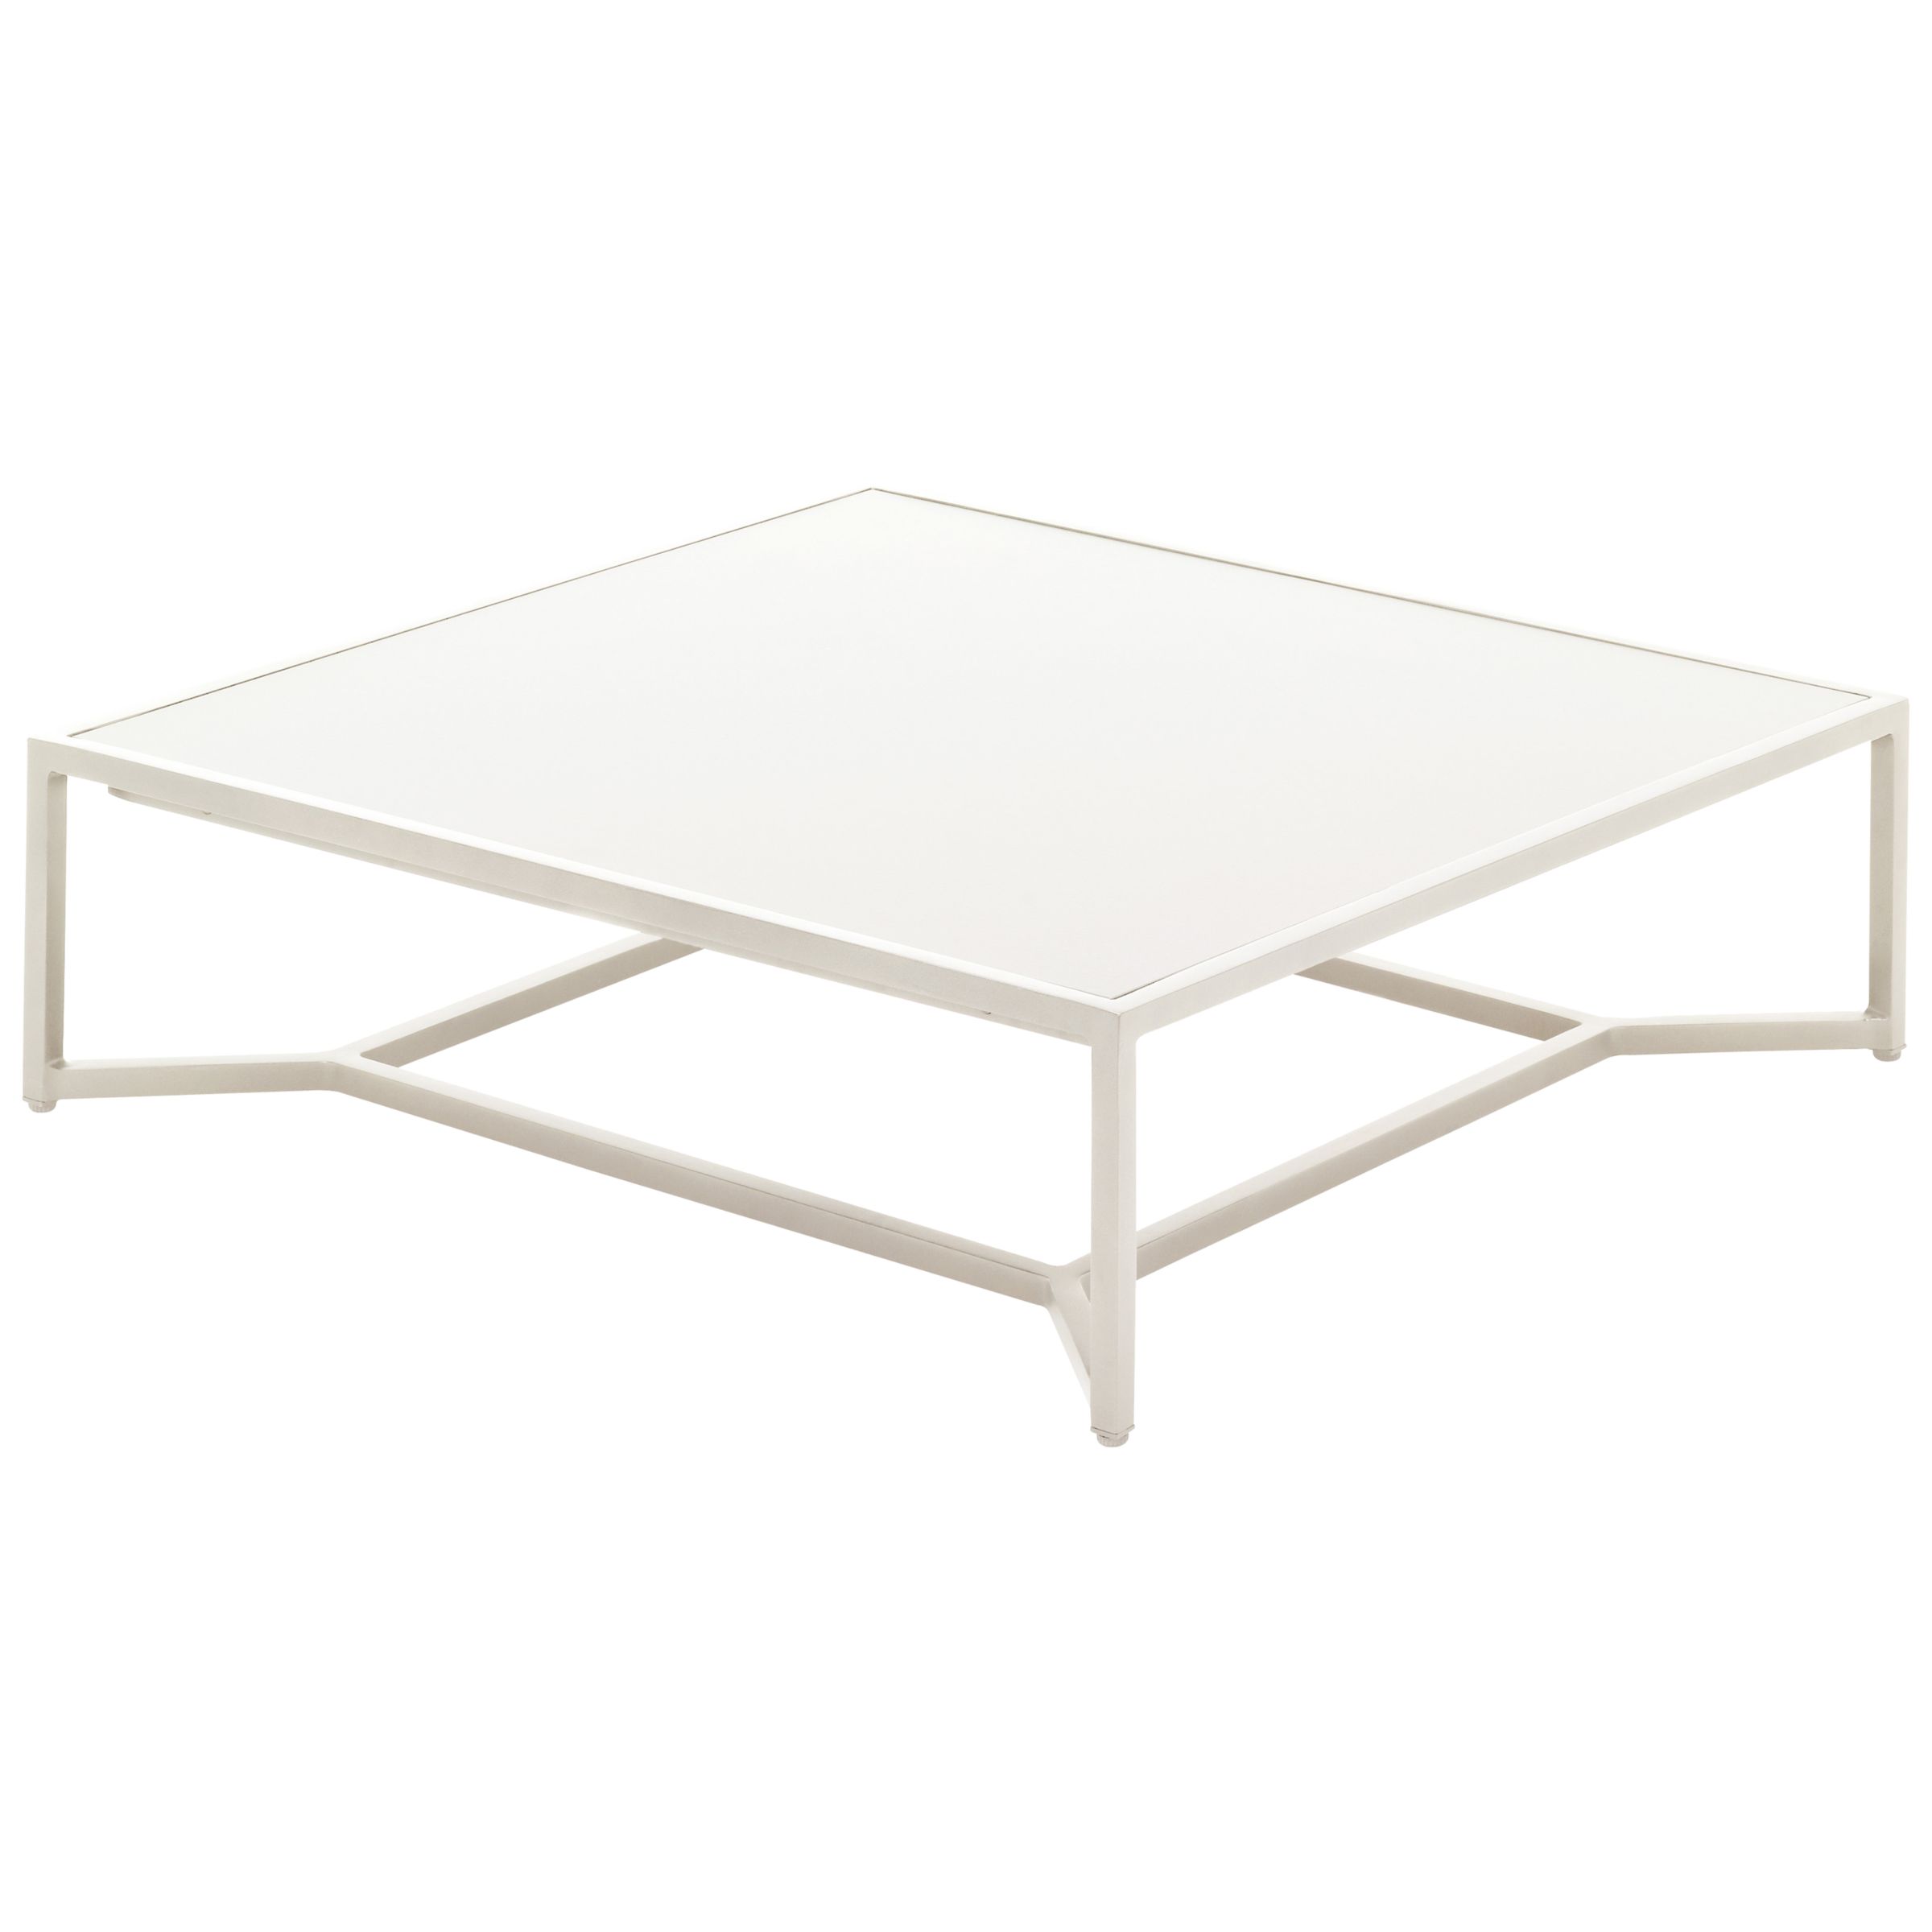 Gloster Bloc Low Square Outdoor Coffee Table, White, 90 x 90cm, width 90cm